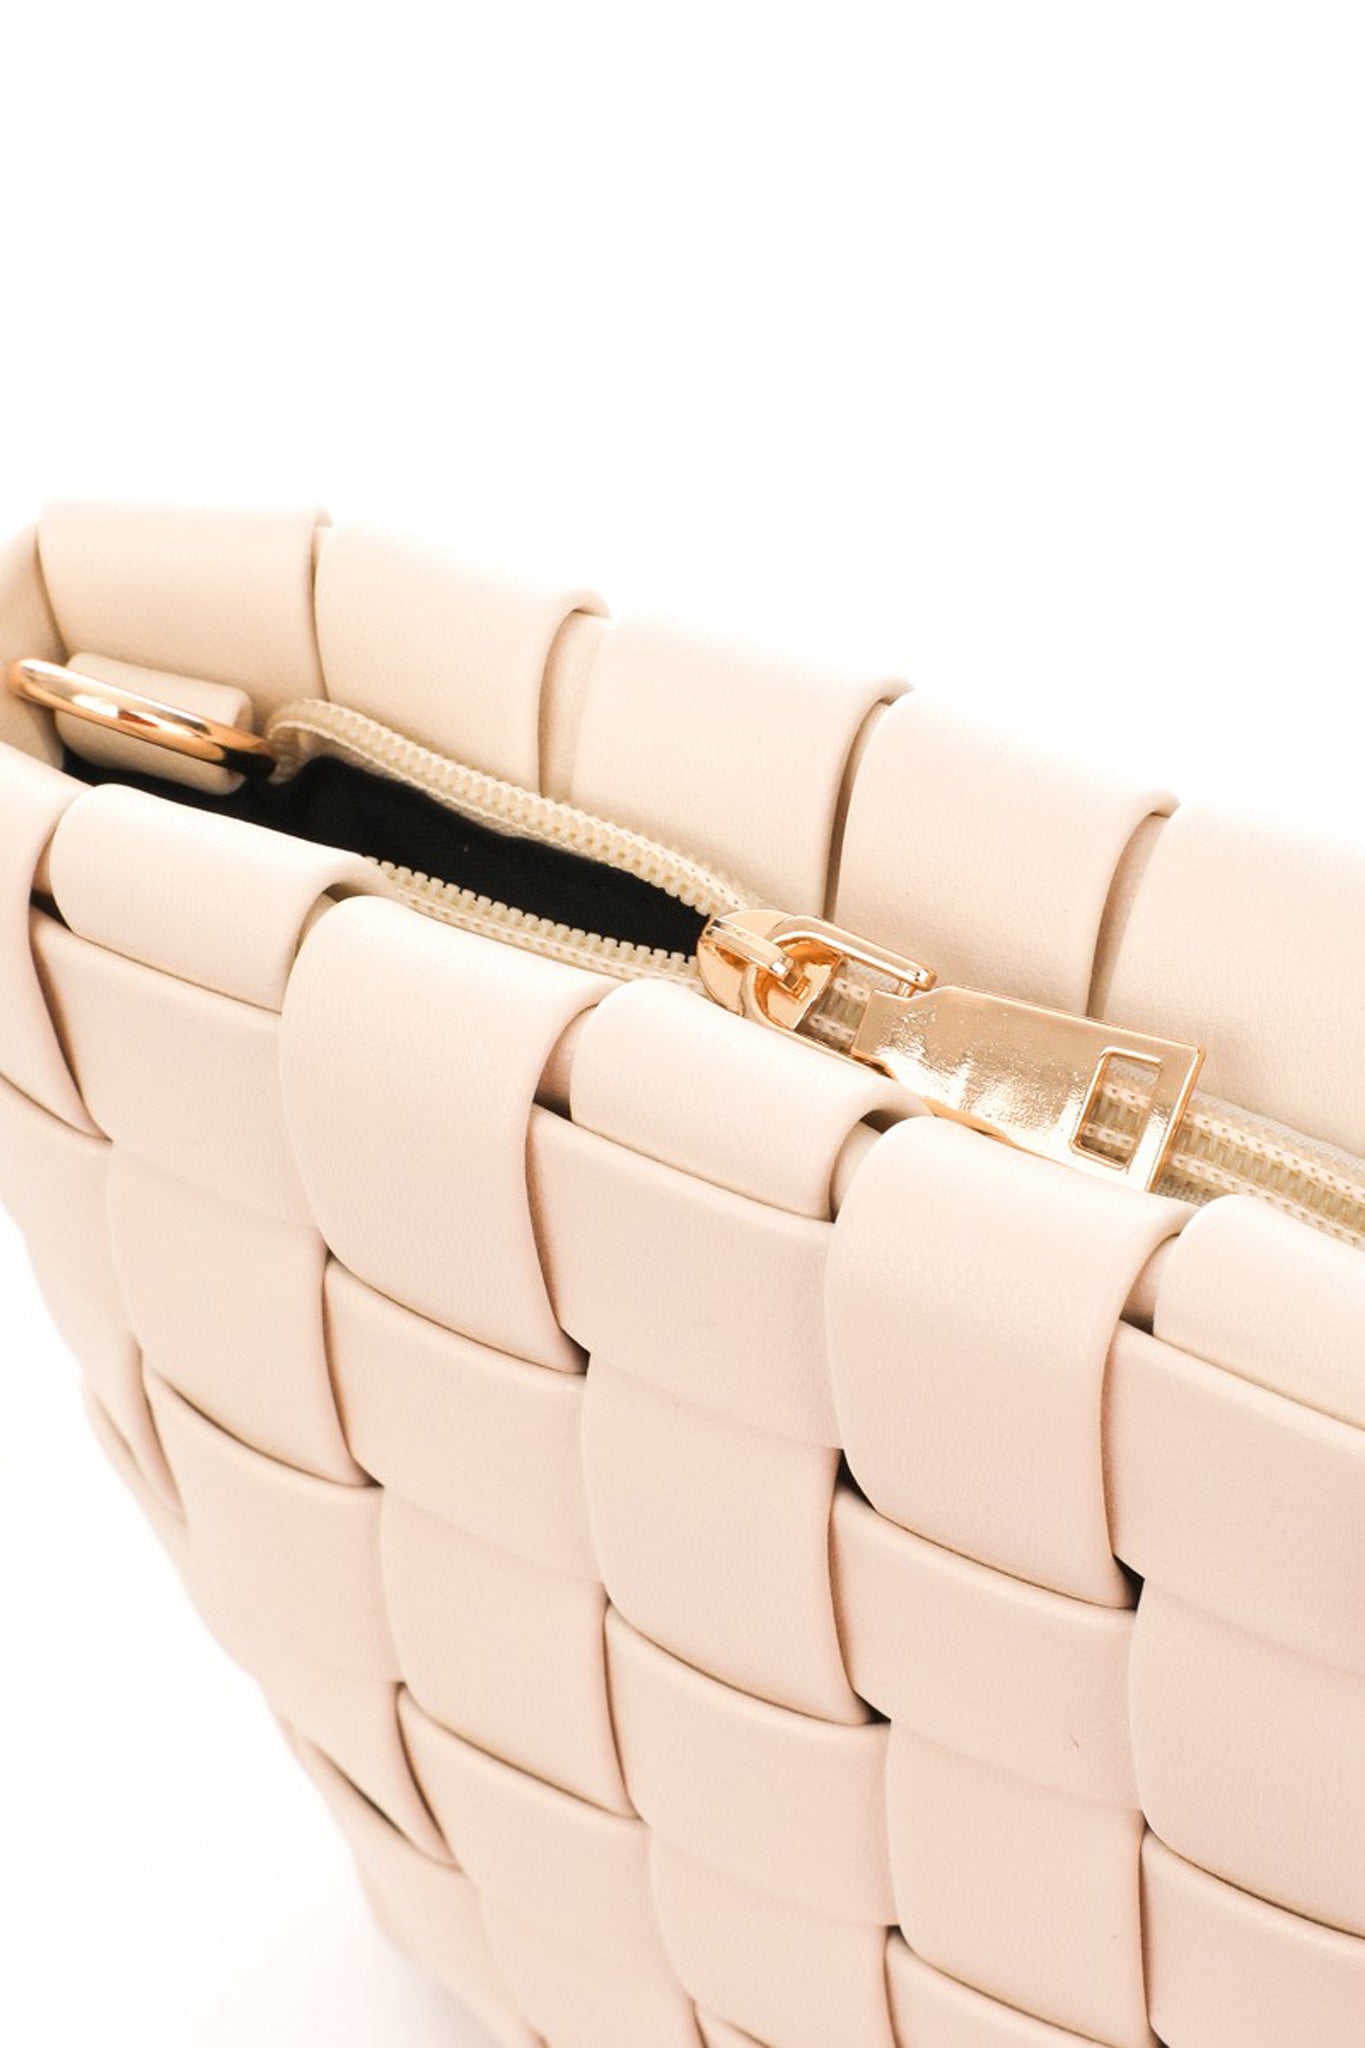 View 7 of Keen Woven Clutch in Ivory, a Bags from Larrea Cove. Detail: .